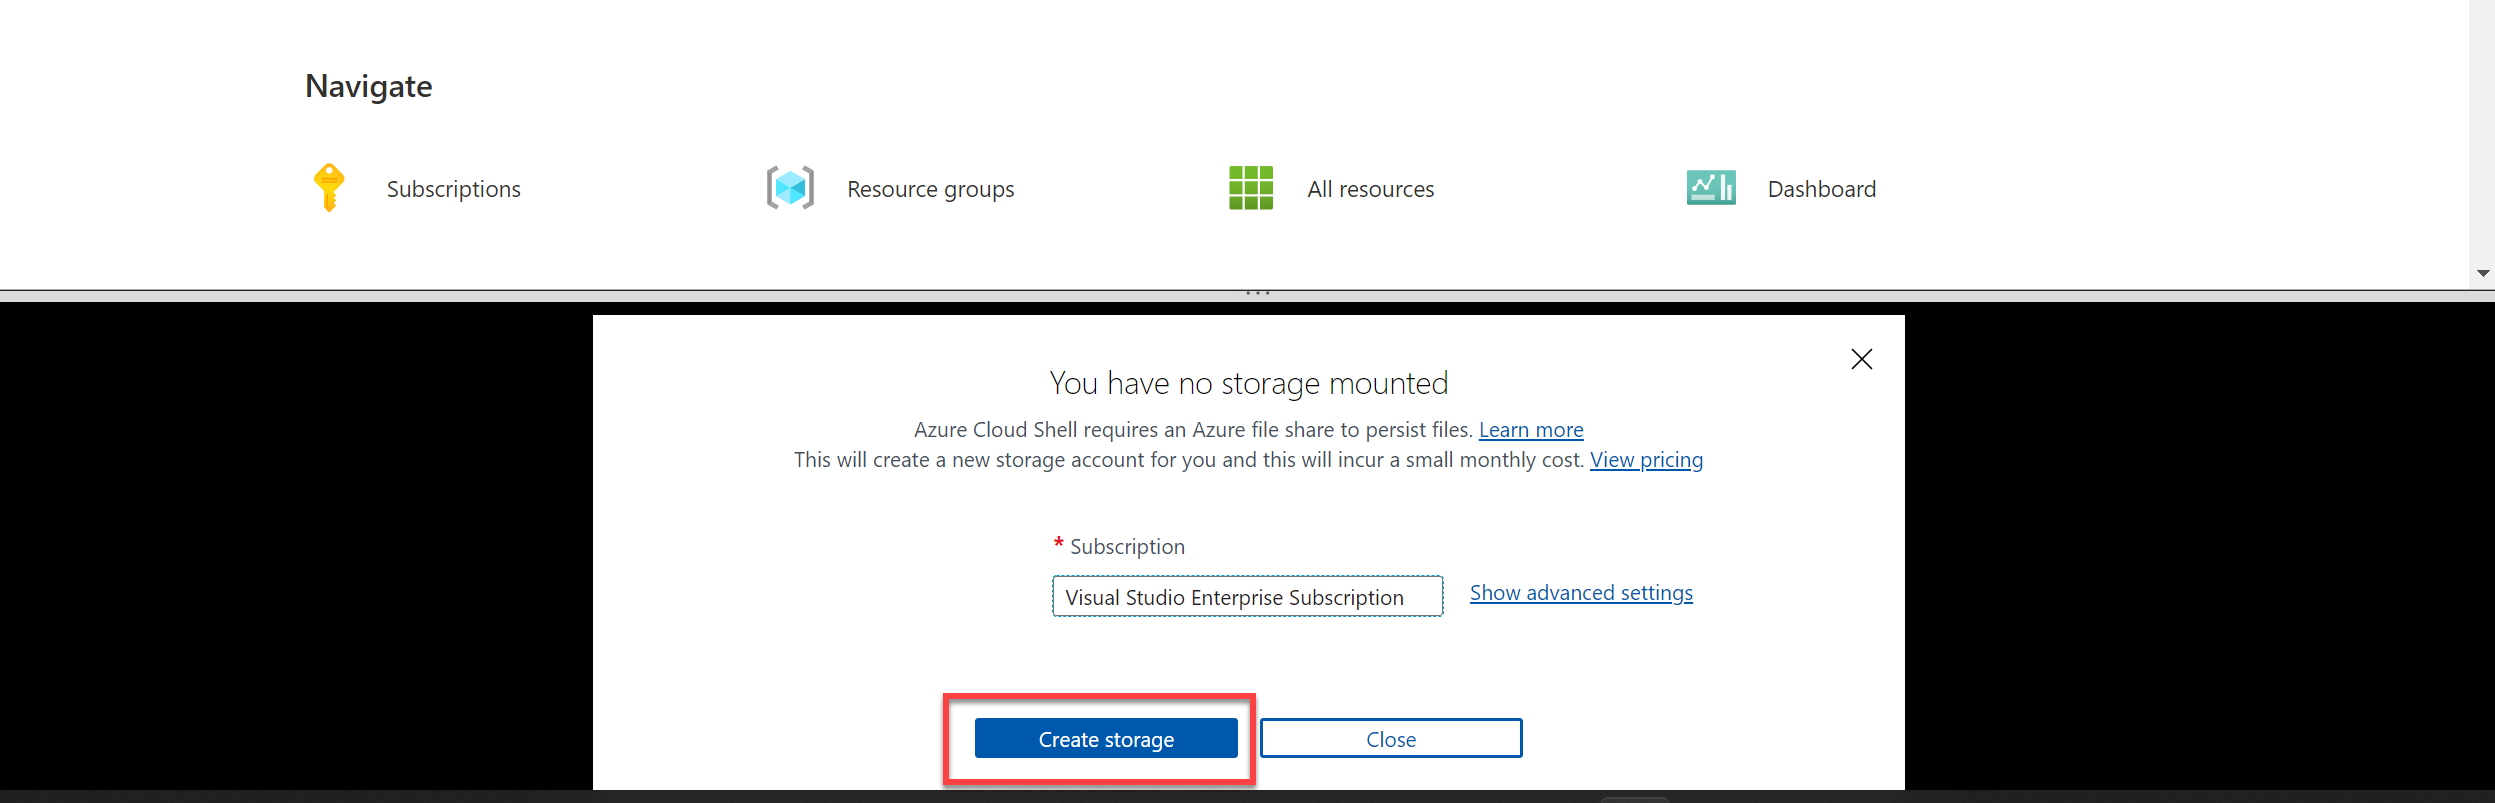 Create storage by clicking confirm.